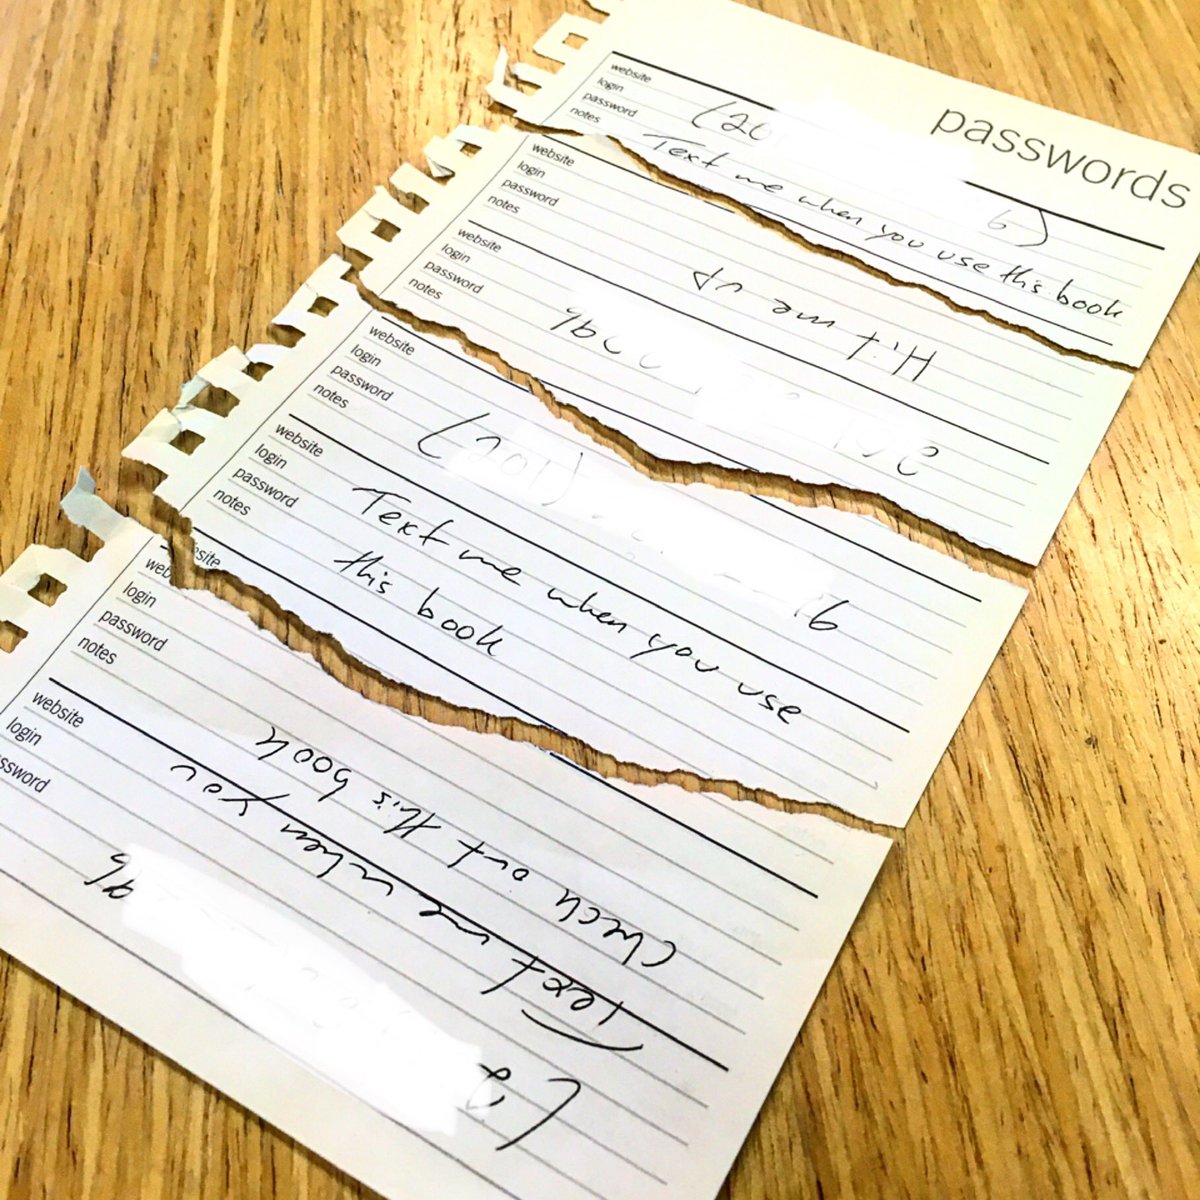 we found the four fragments in four variously located books. That they apparently remained where the writer left them says something, I guess, about this technique for meeting people.